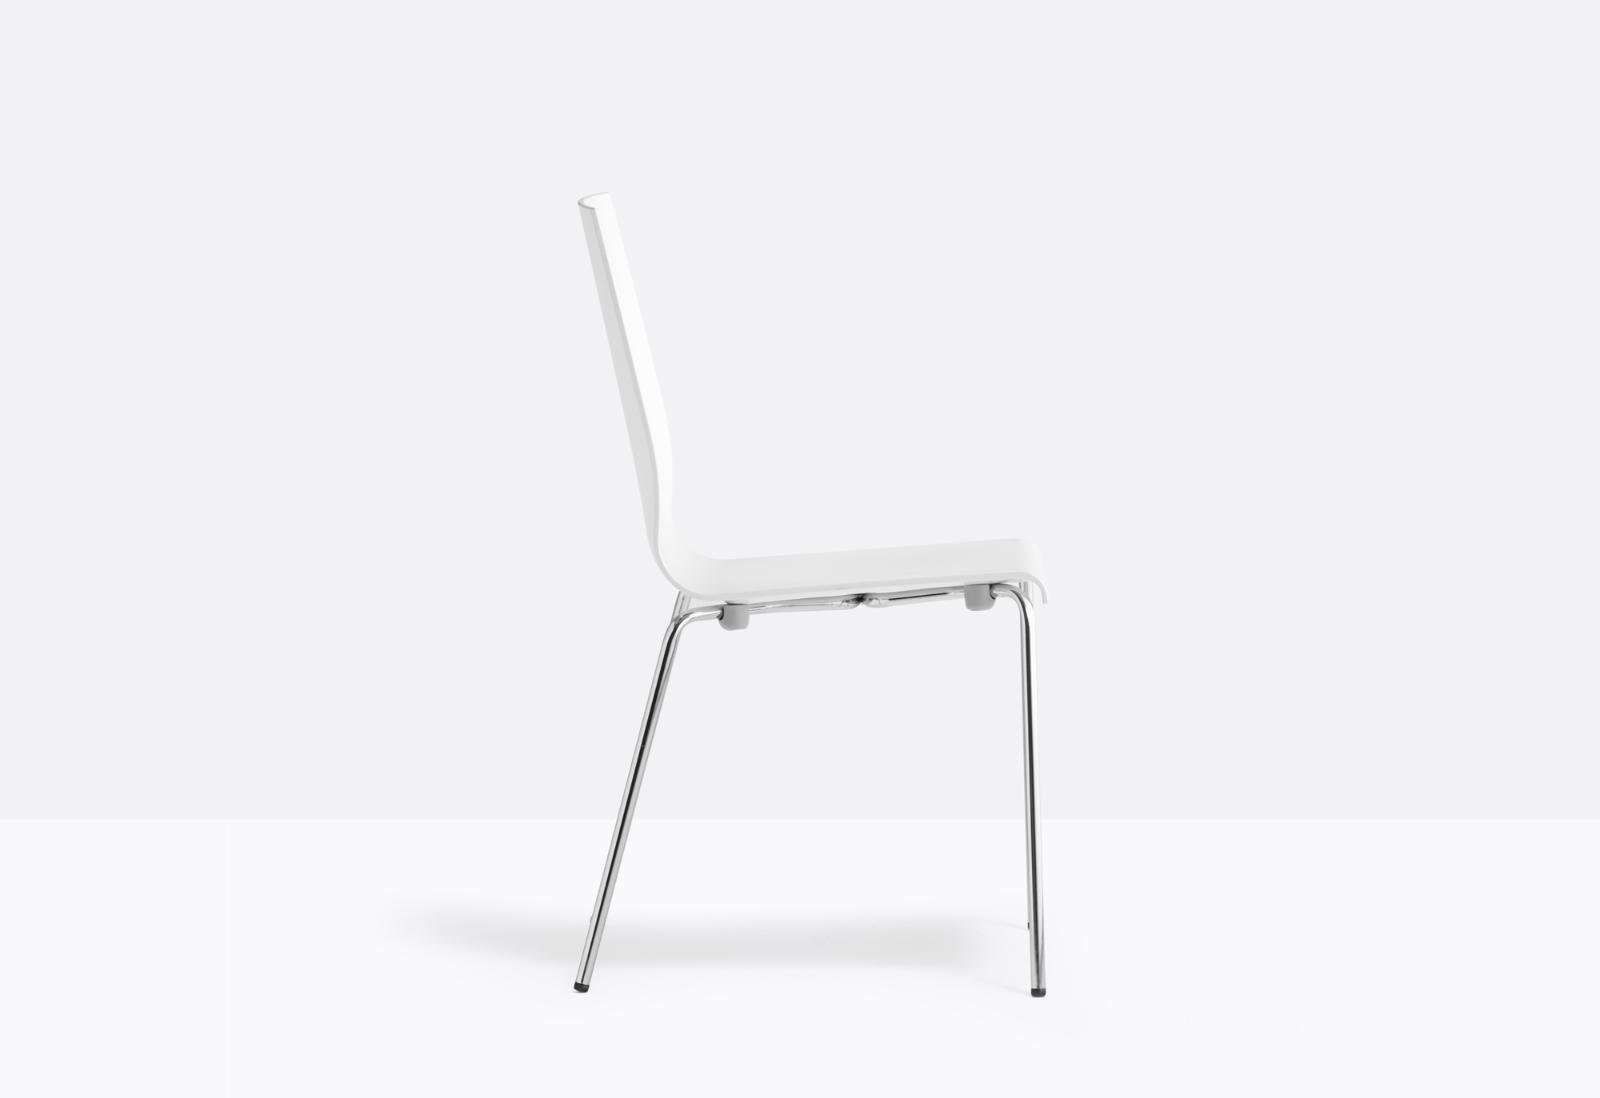 Kuadra Chair 1151 from Pedrali, designed by Pedrali R&D